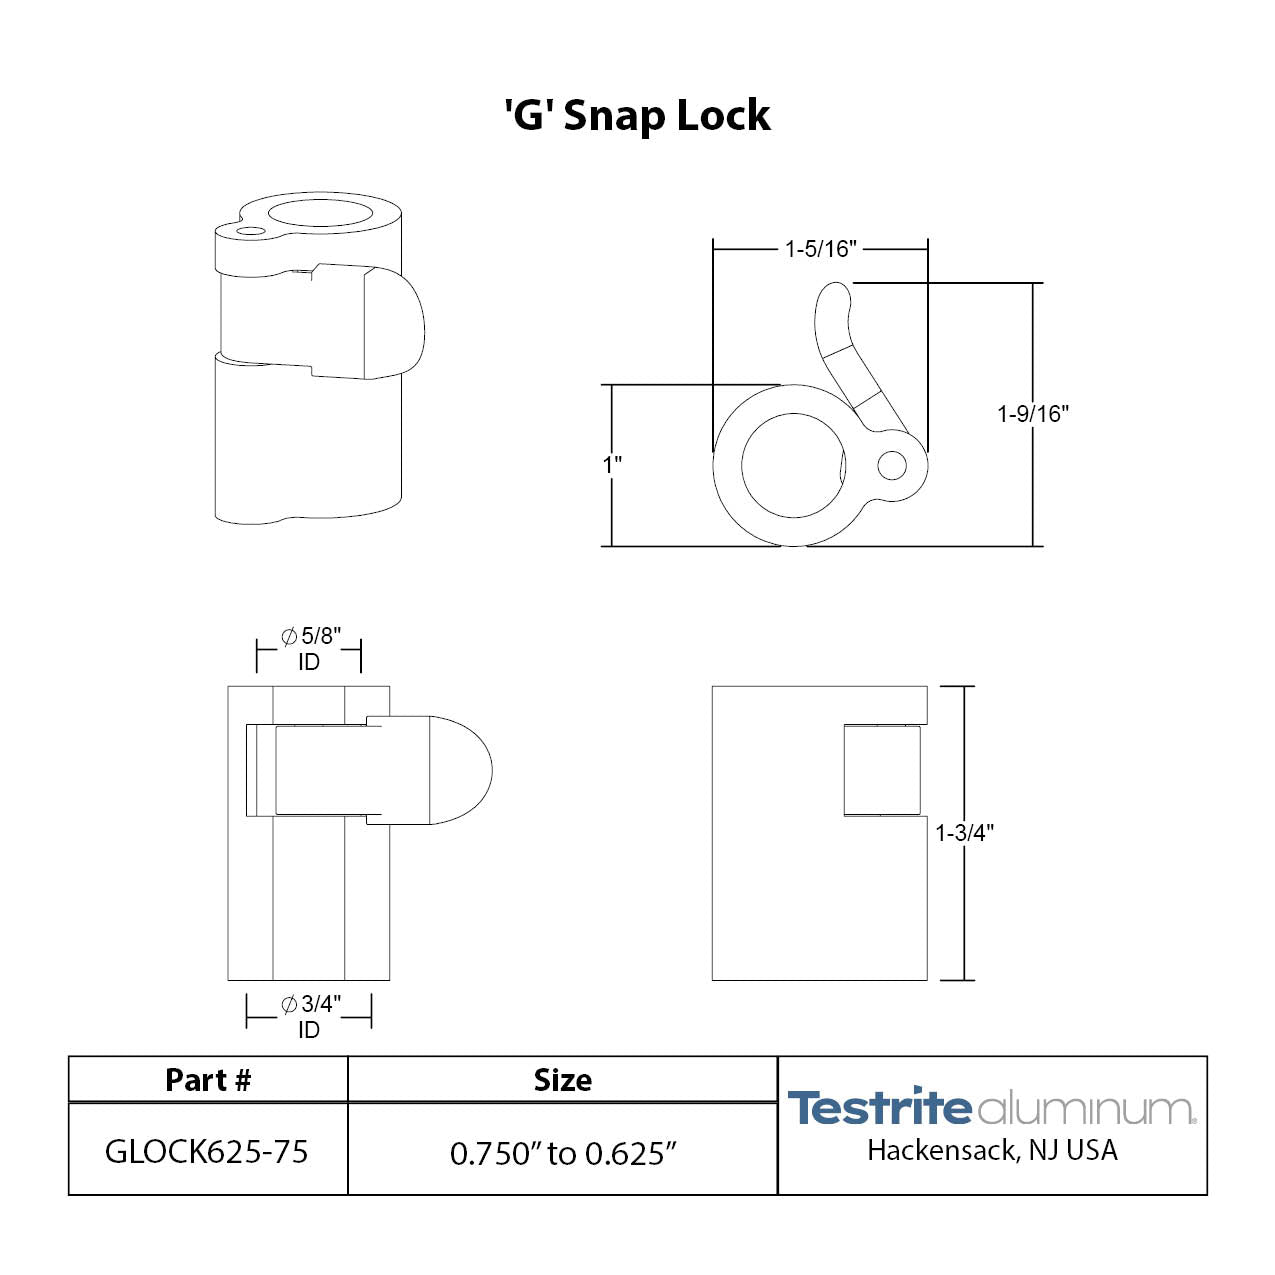 G Lock Spec sheet 5/8" to 3/4", telescopic tubing clamp 0.625" to 0.75"